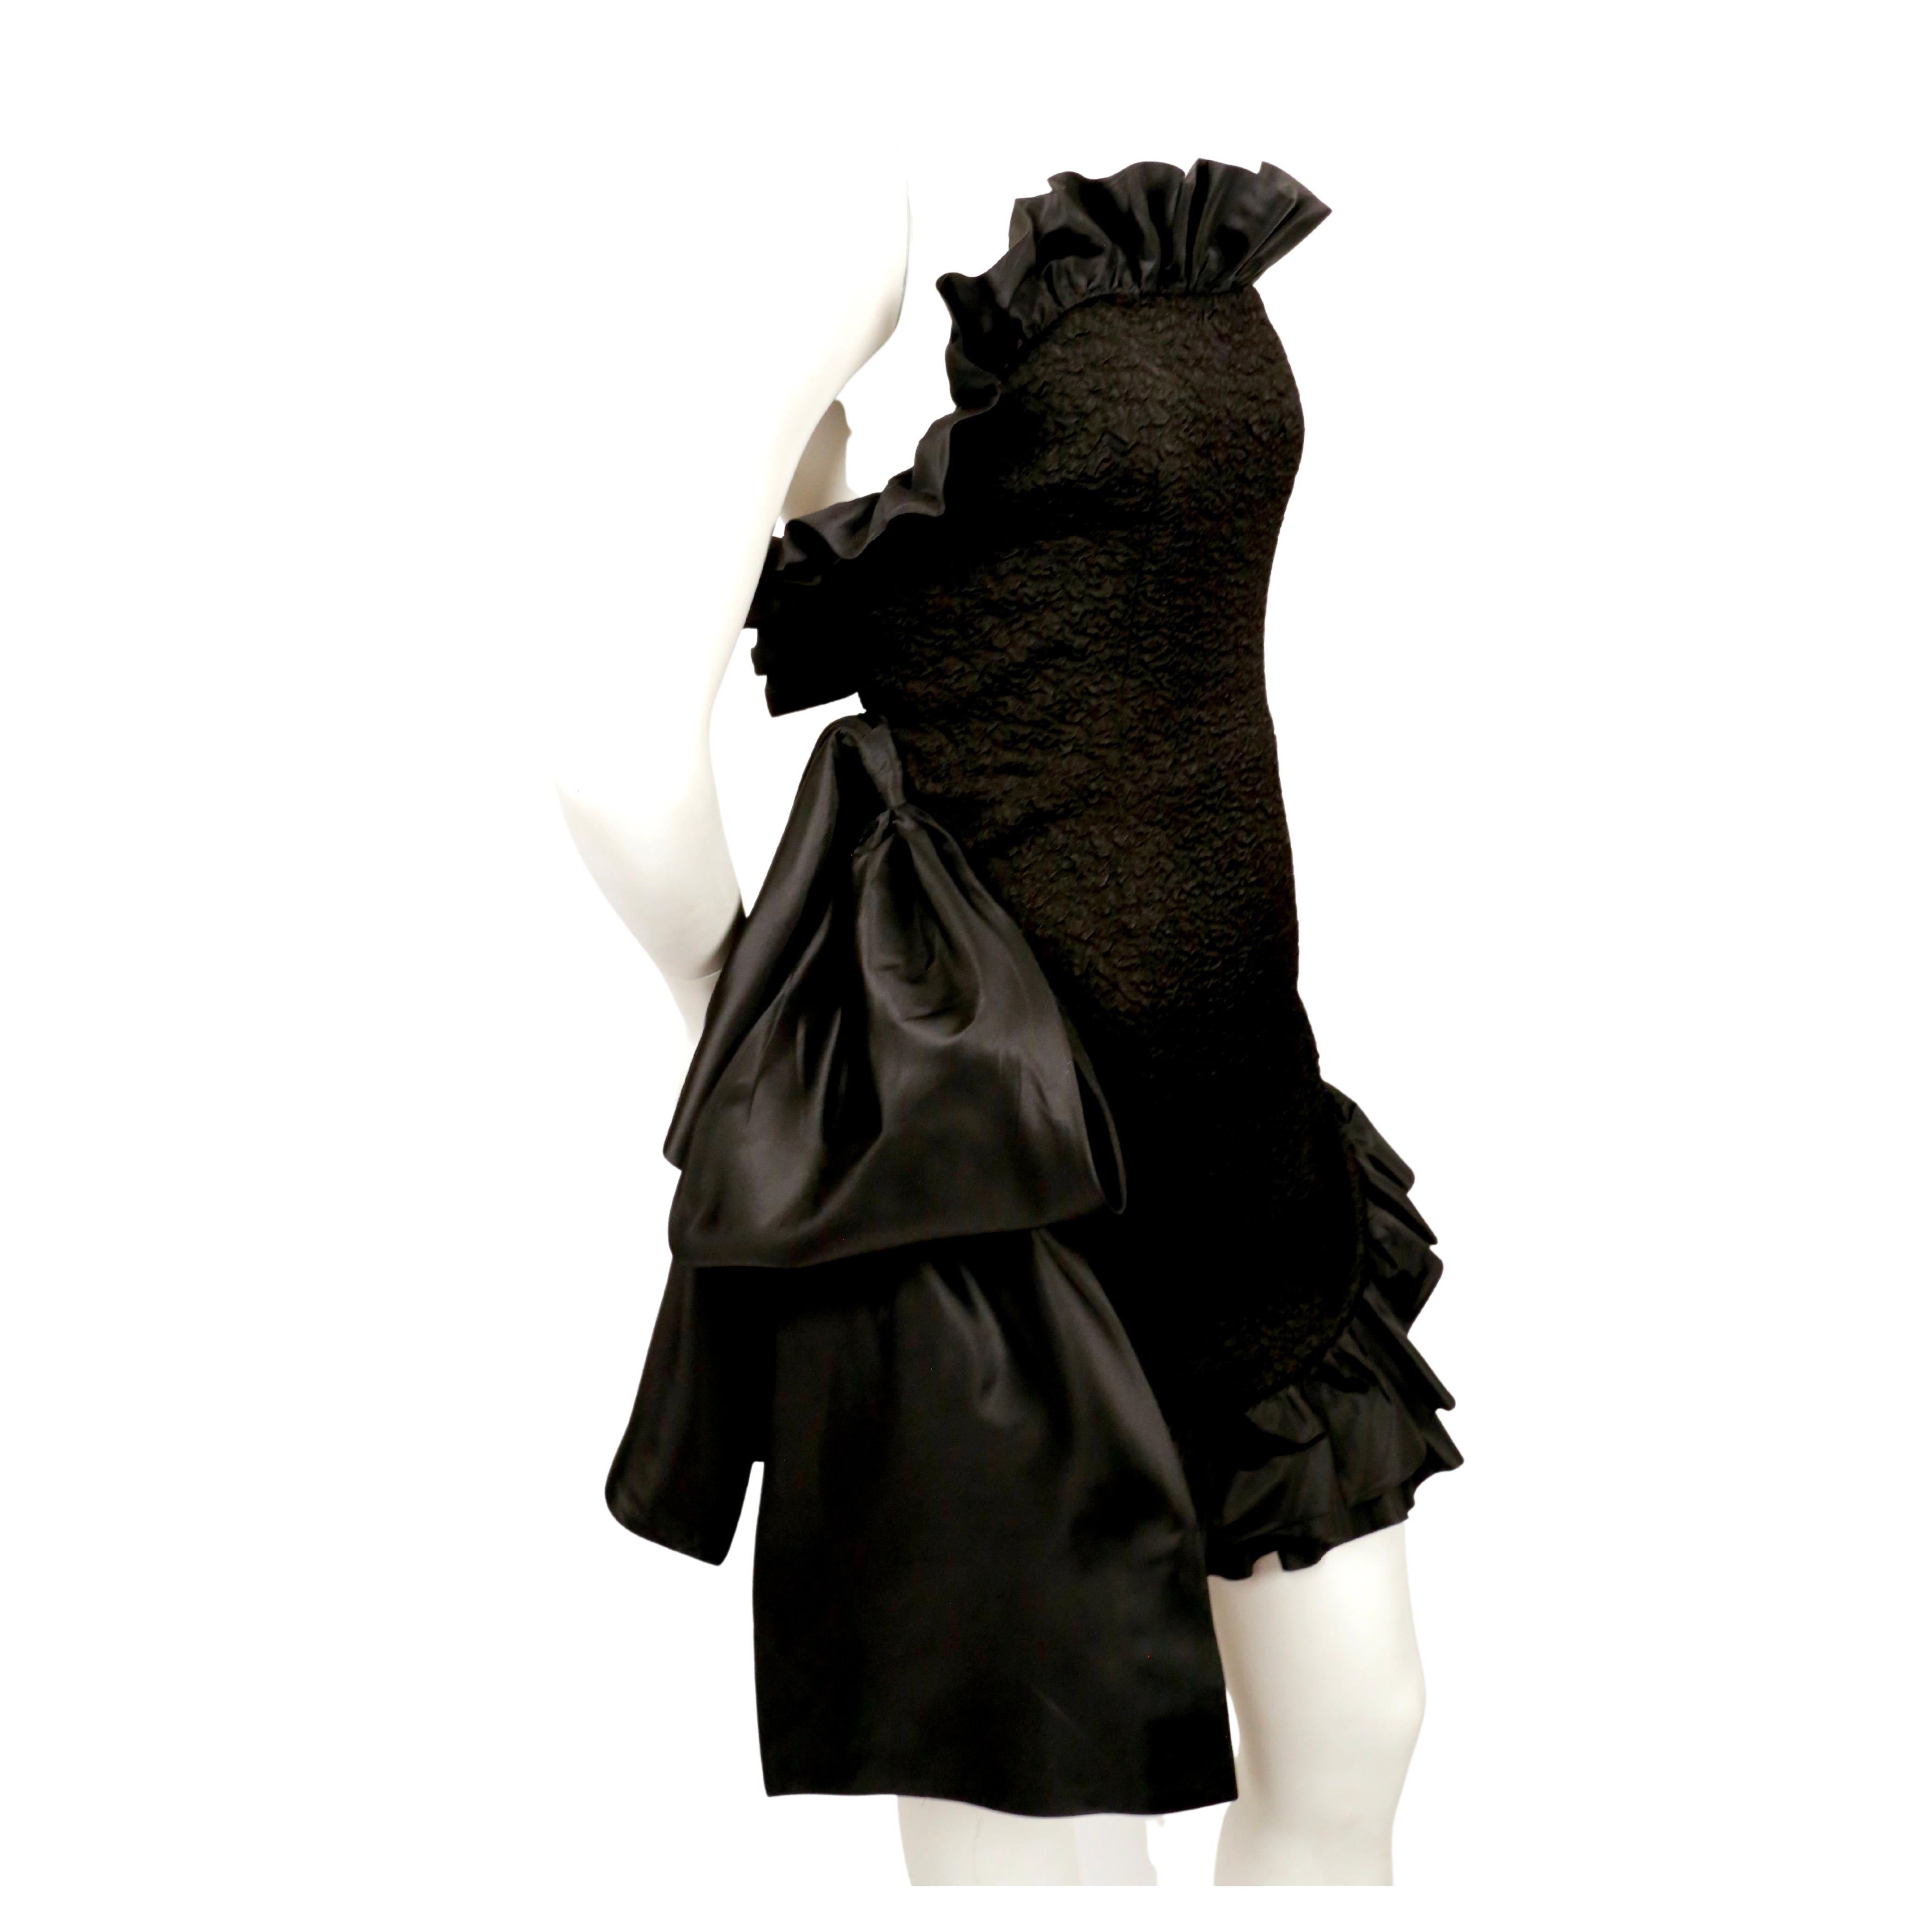 Dramatic, jet-black textured dress with satin ruffled trim and large bow designed by Yves Saint Laurent dating to the 1980's. Fully internal corset with boning at bodice. Labeled a French size 38. Approximate measurements: bust 32